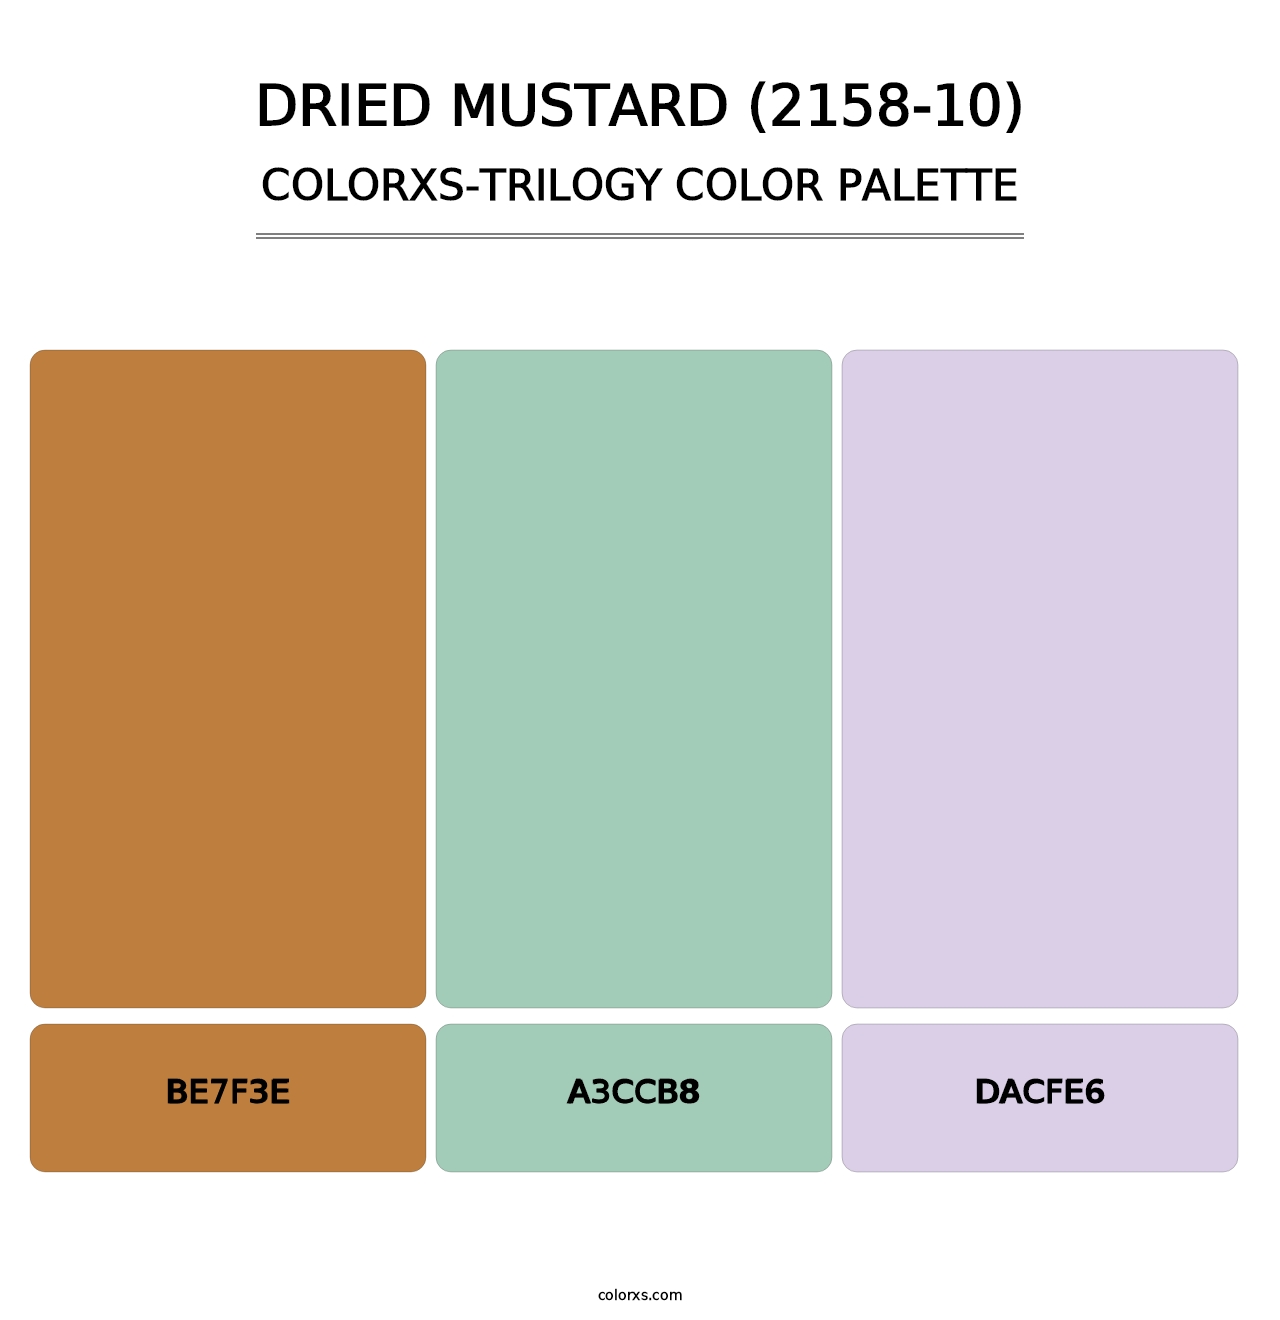 Dried Mustard (2158-10) - Colorxs Trilogy Palette